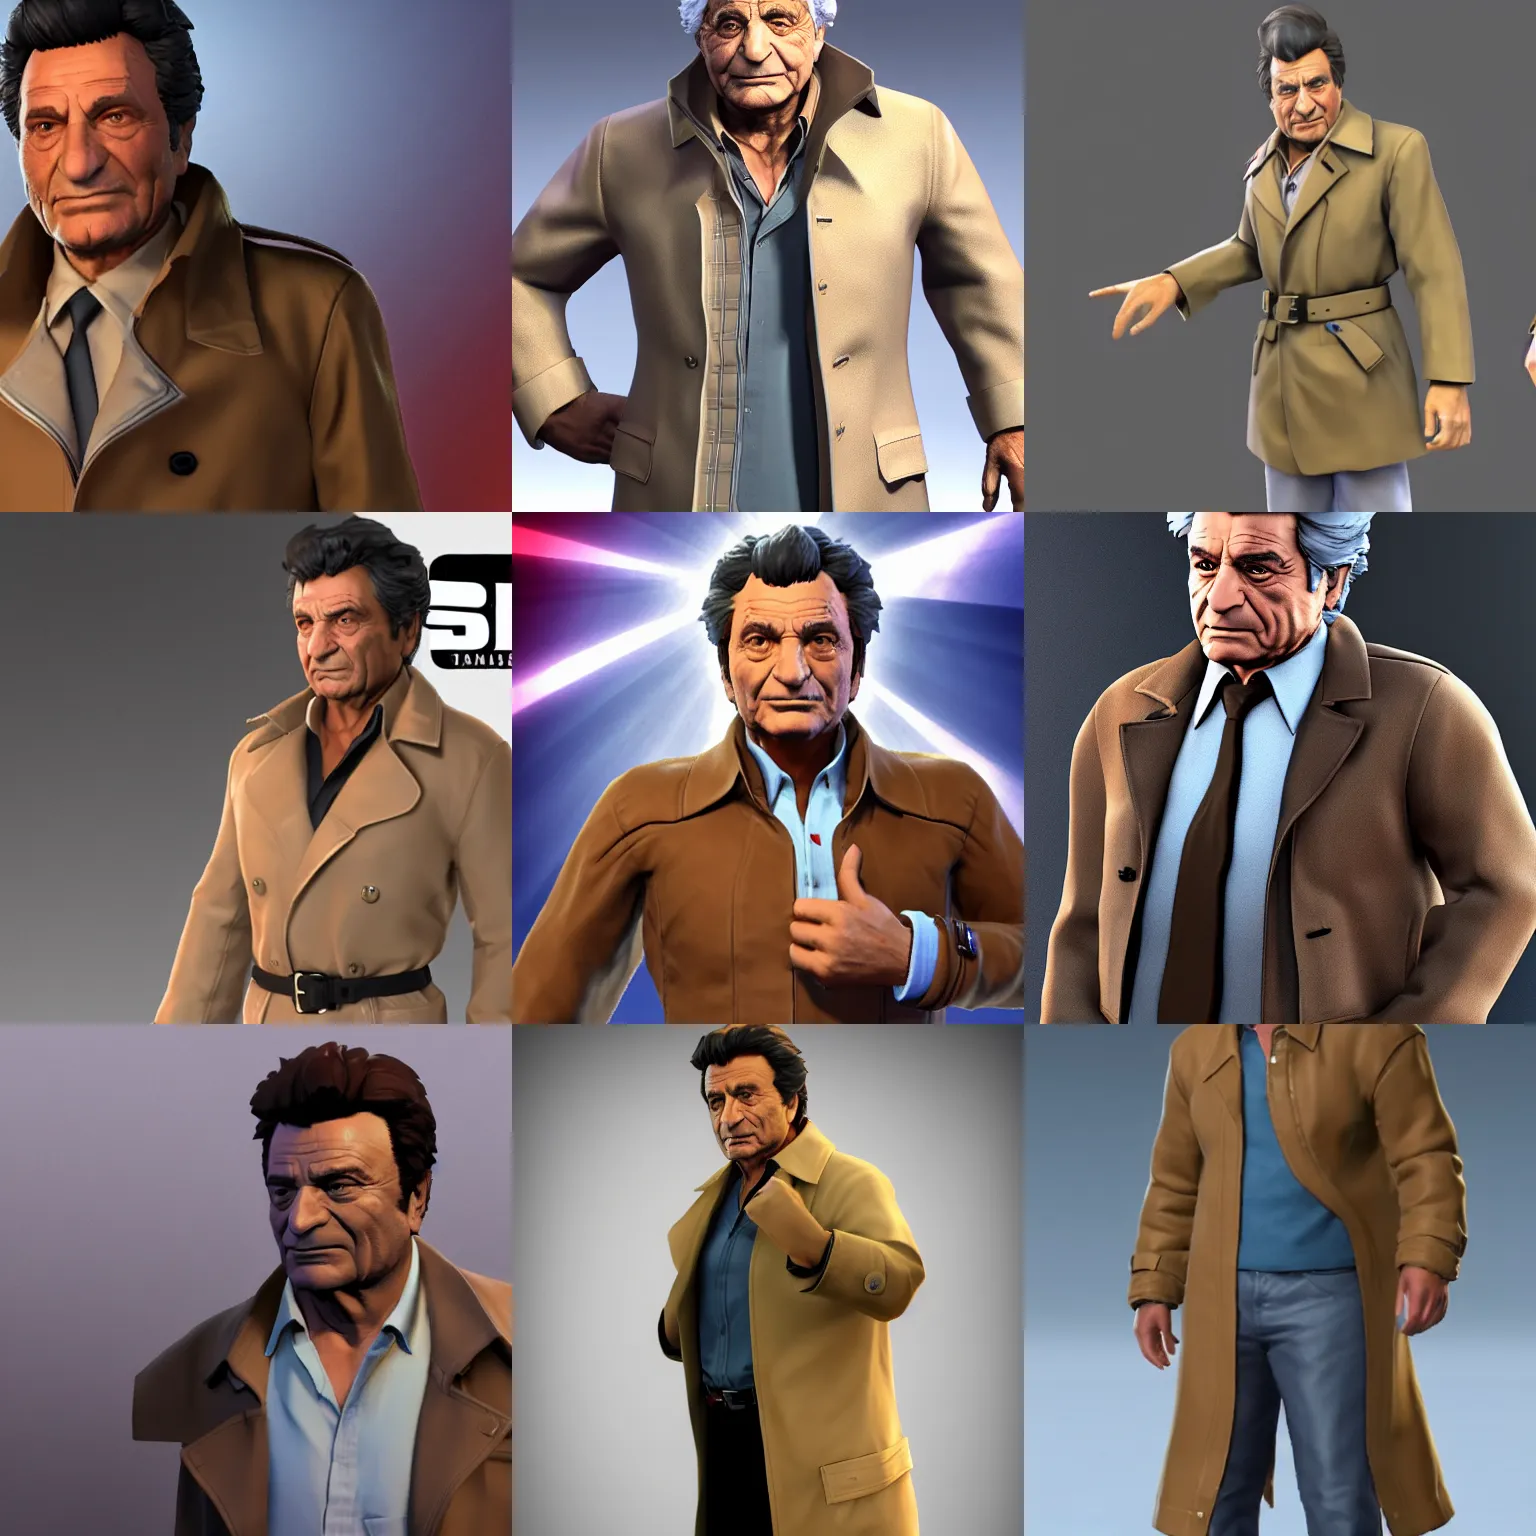 peter falk in a tan trench coat as a character in | Stable Diffusion ...